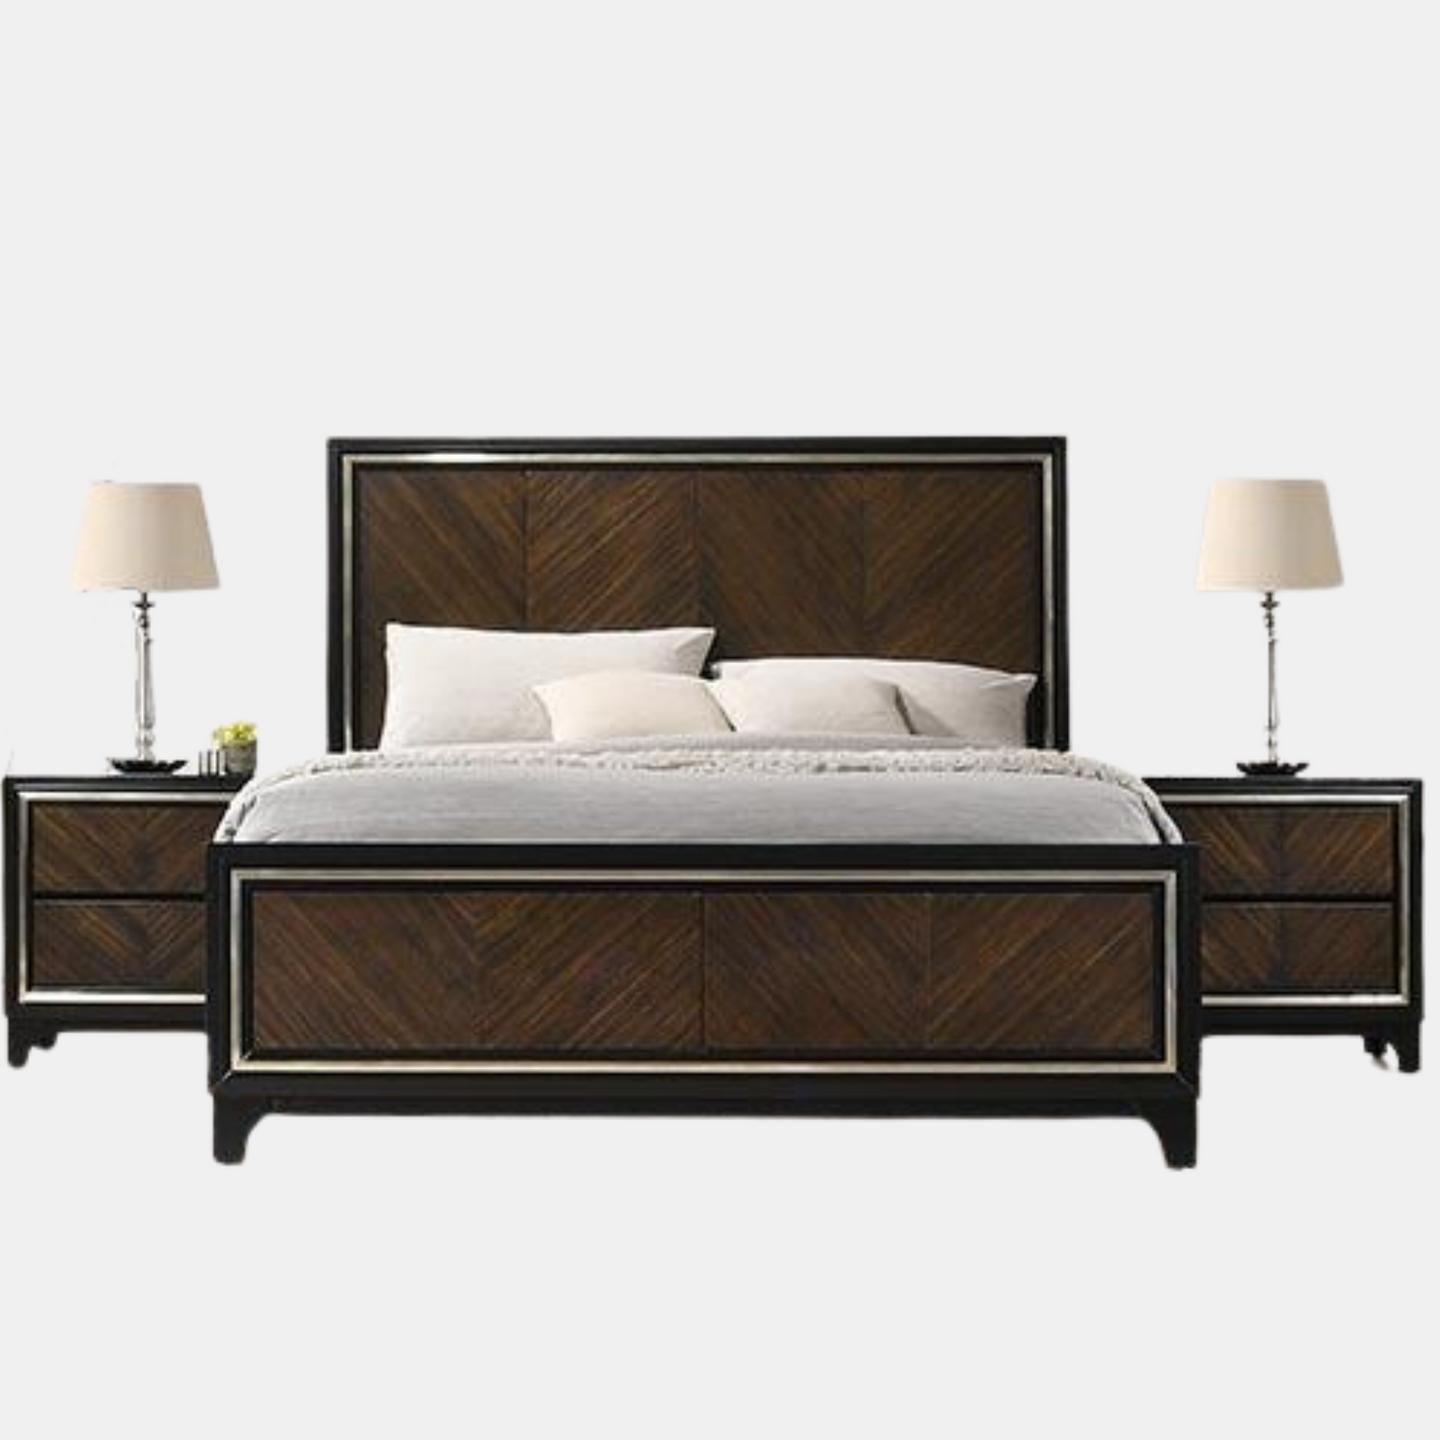 Modern oak veneer bedframe finished in a dark stain with black frame and silver edge highlights